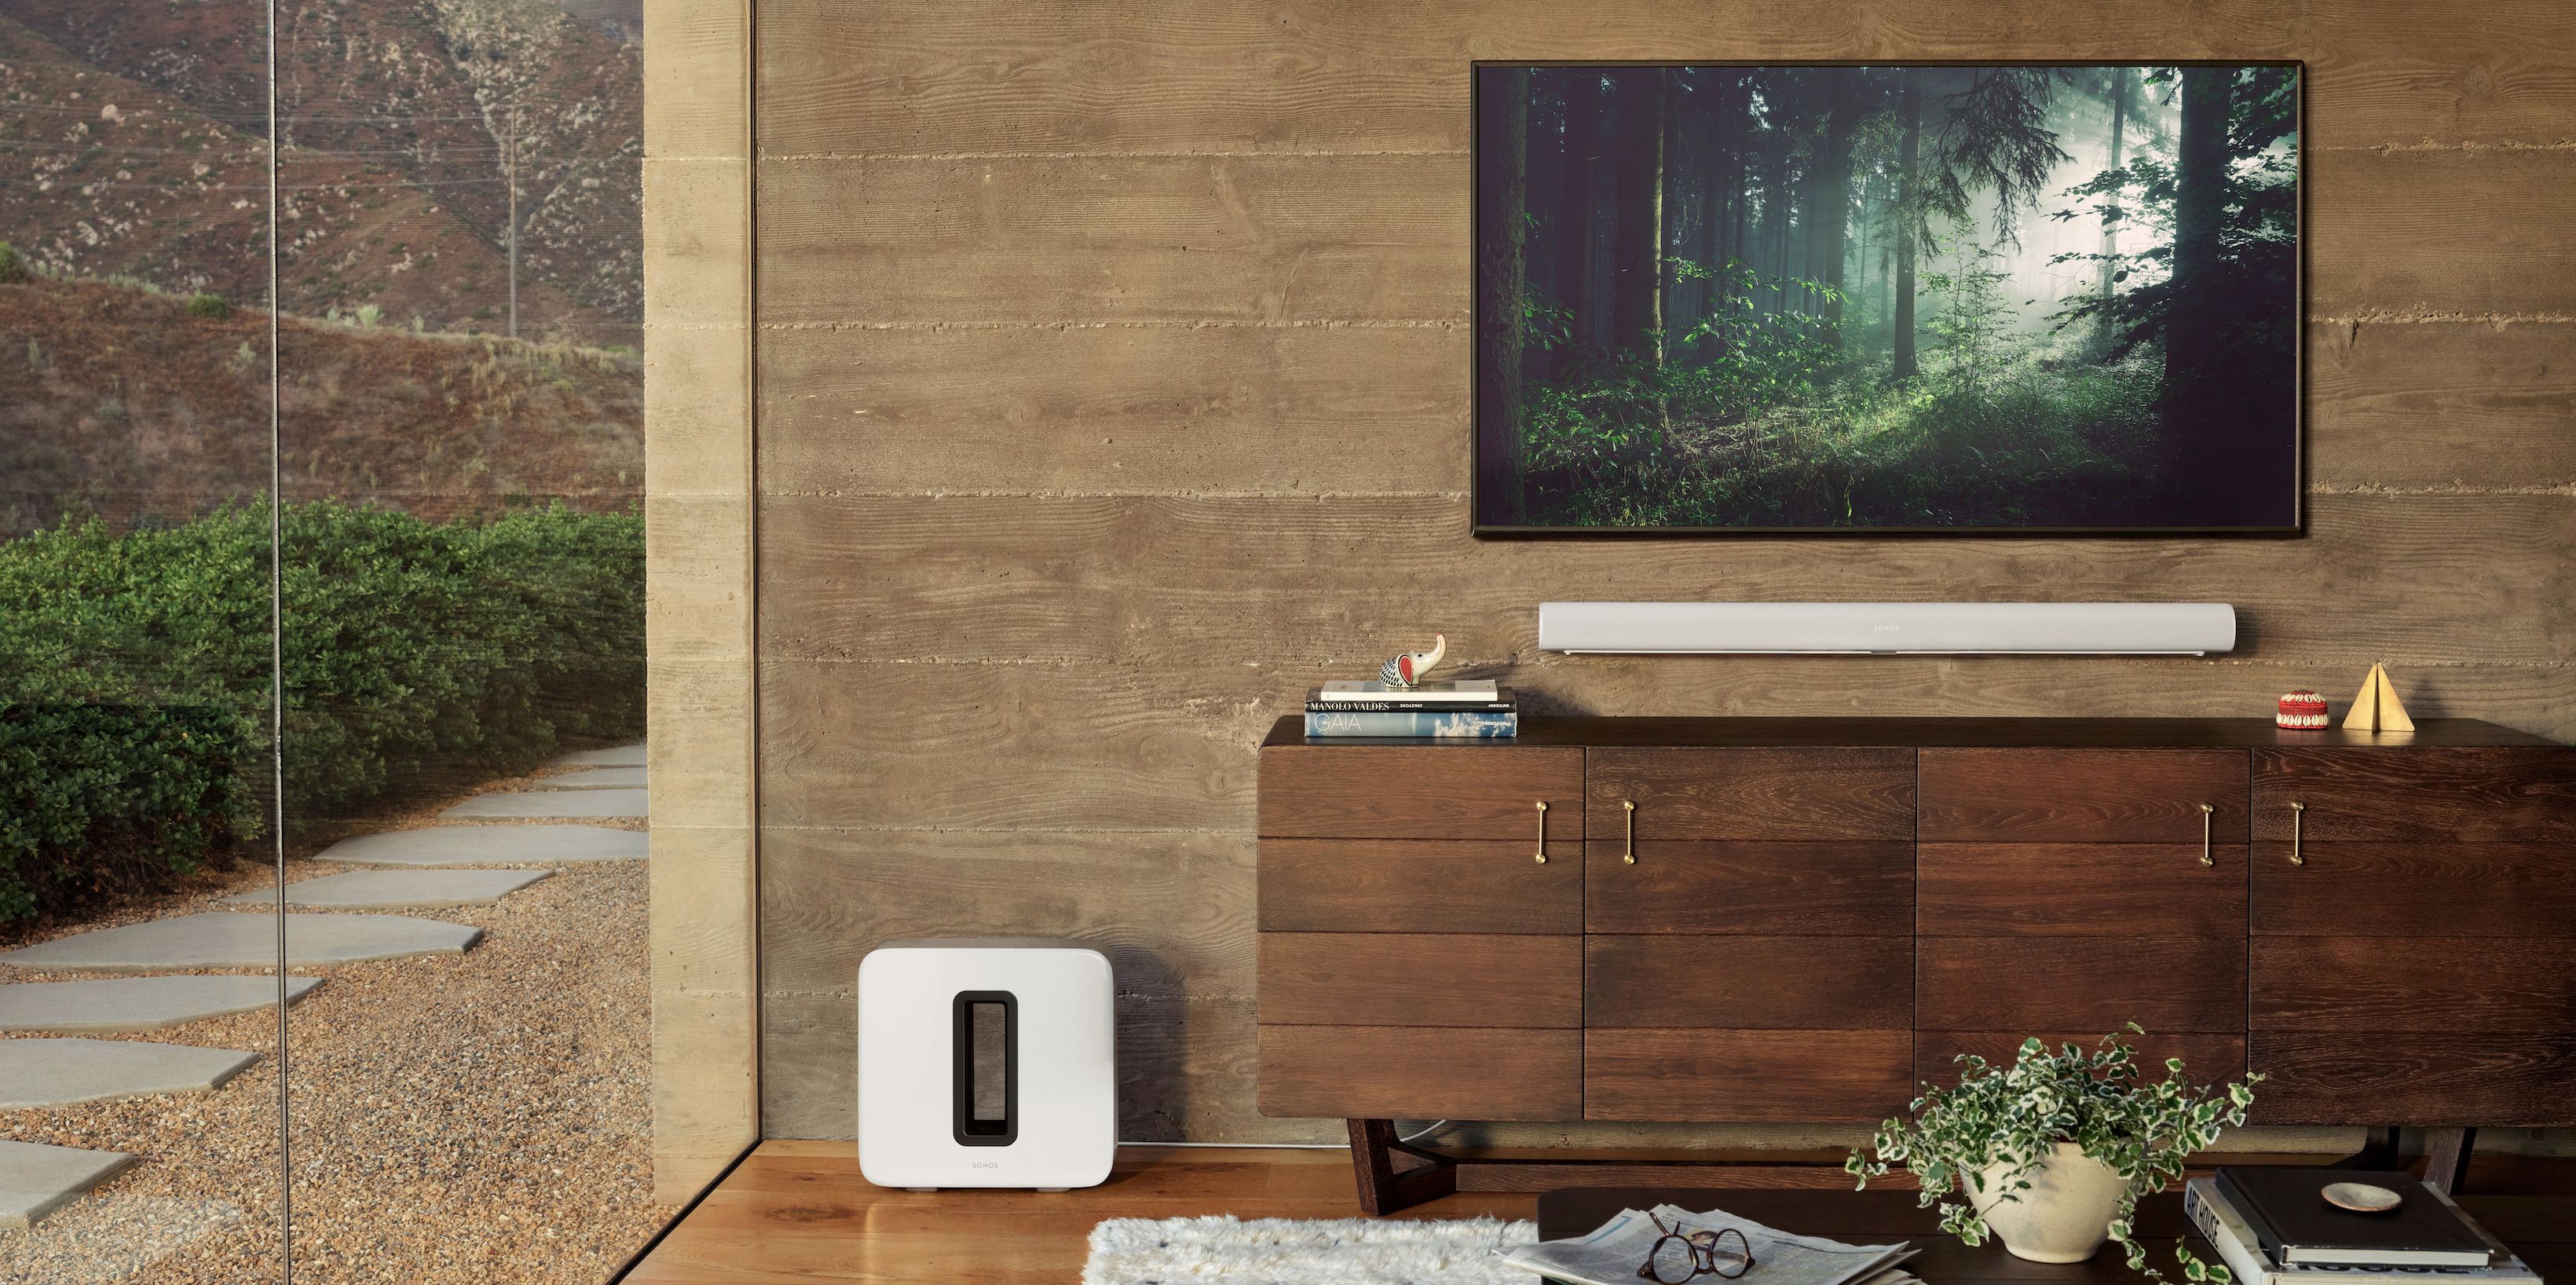 Limited Shuraba Sobriquette Sonos developing new 'Home Theater OS,' could it be an Apple TV/tvOS  competitor? - 9to5Mac